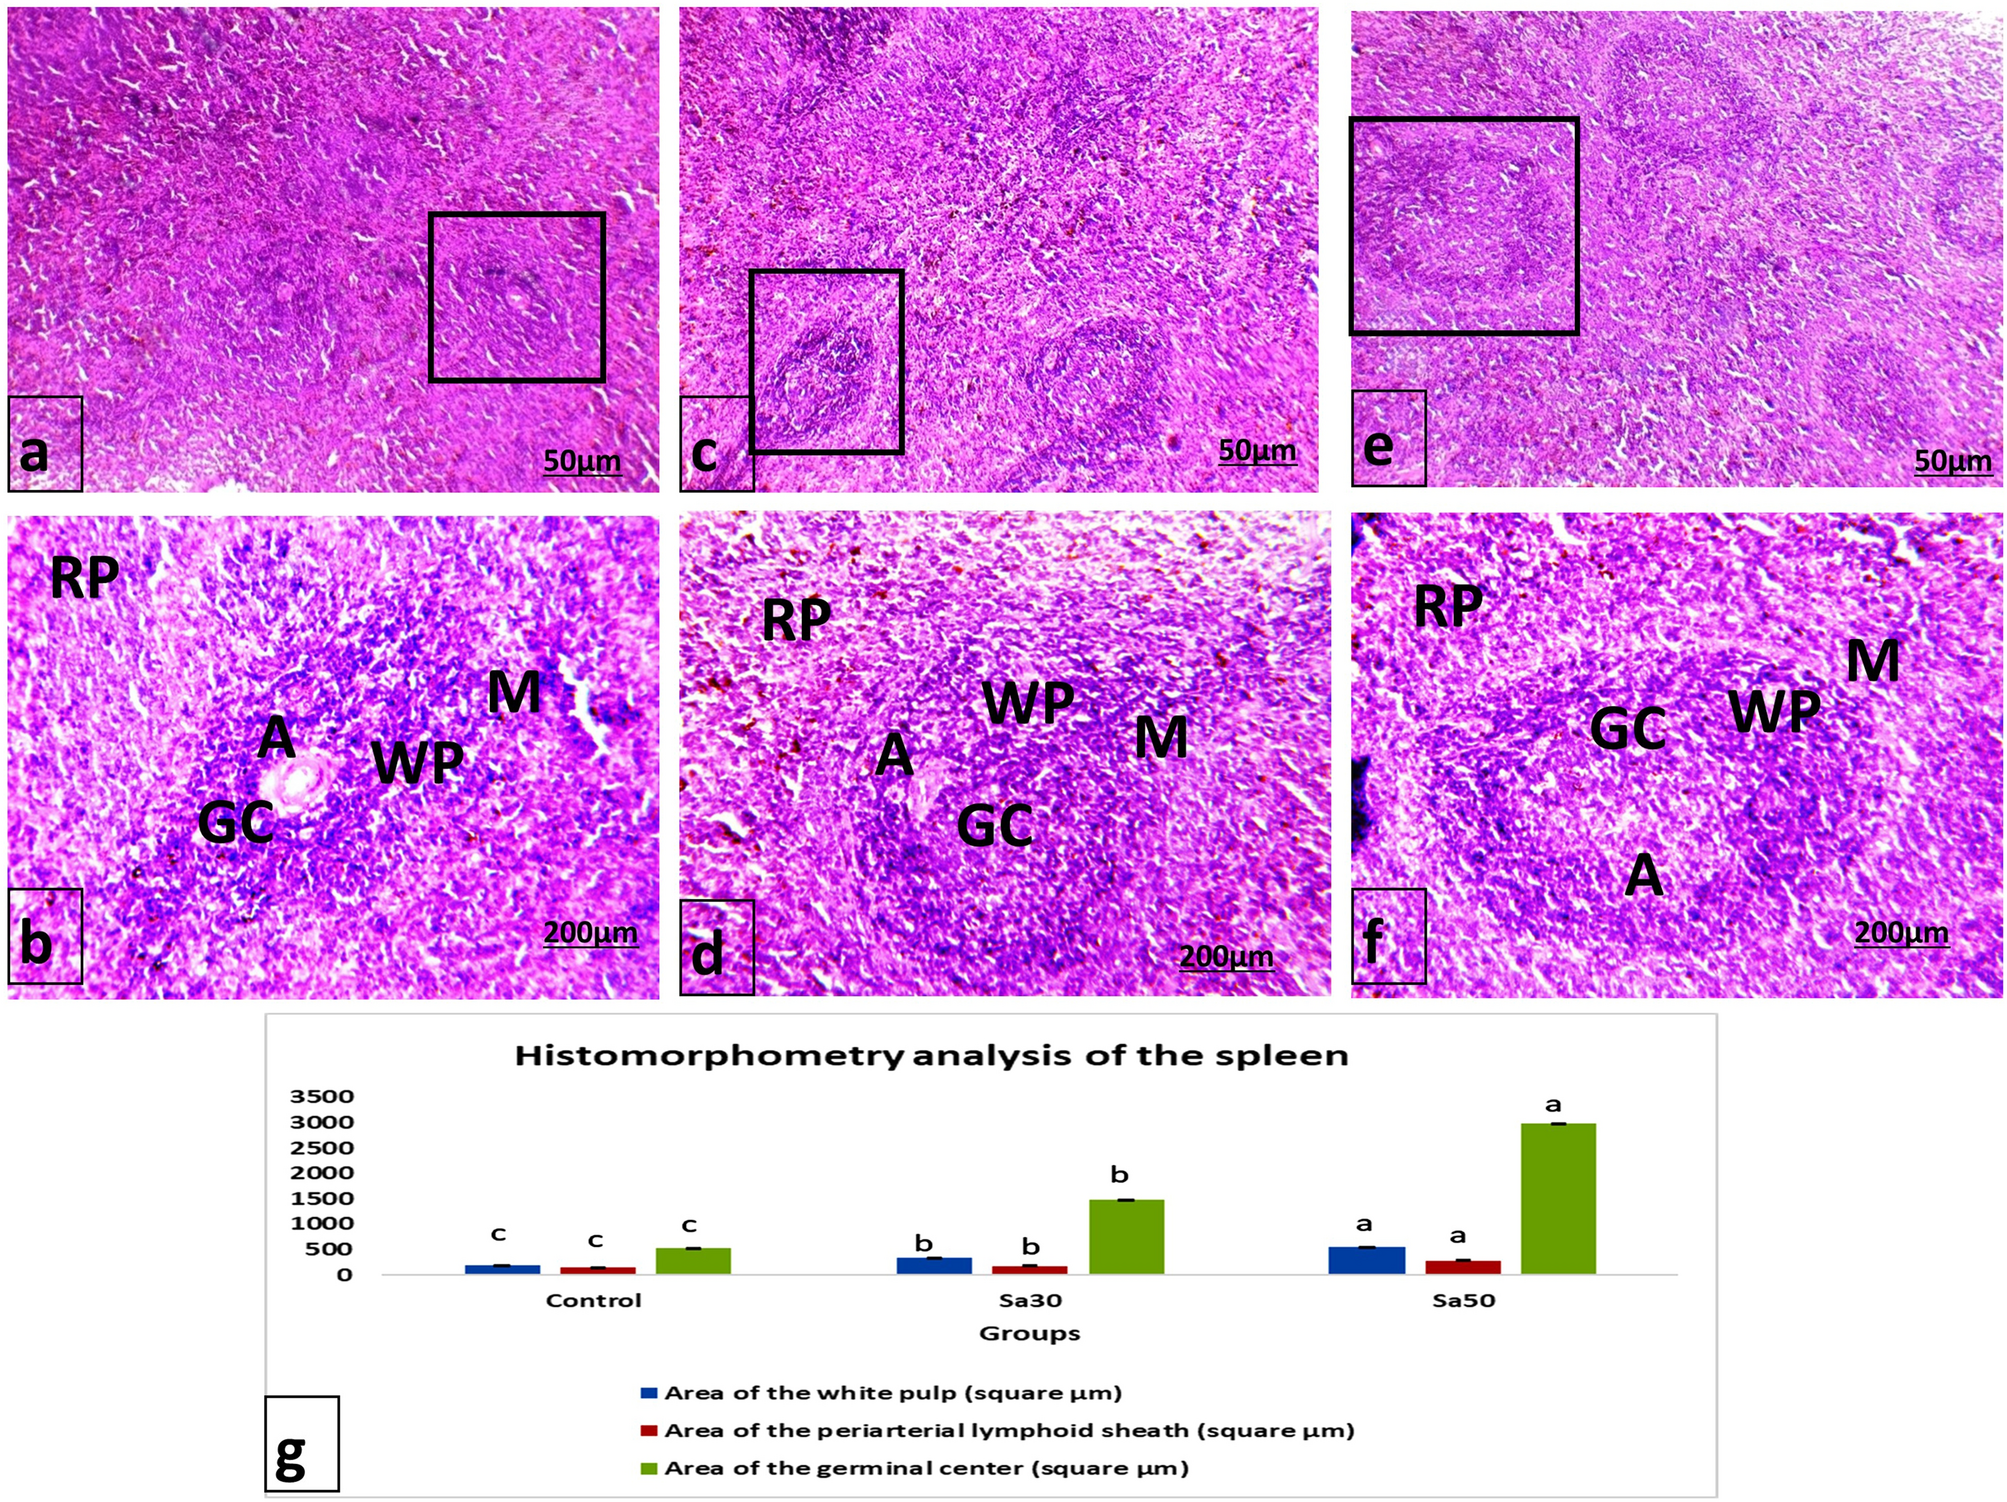 The effect of dietary supplementation with Nigella sativa (black seeds) mediates immunological function in male Wistar rats Scientific Reports